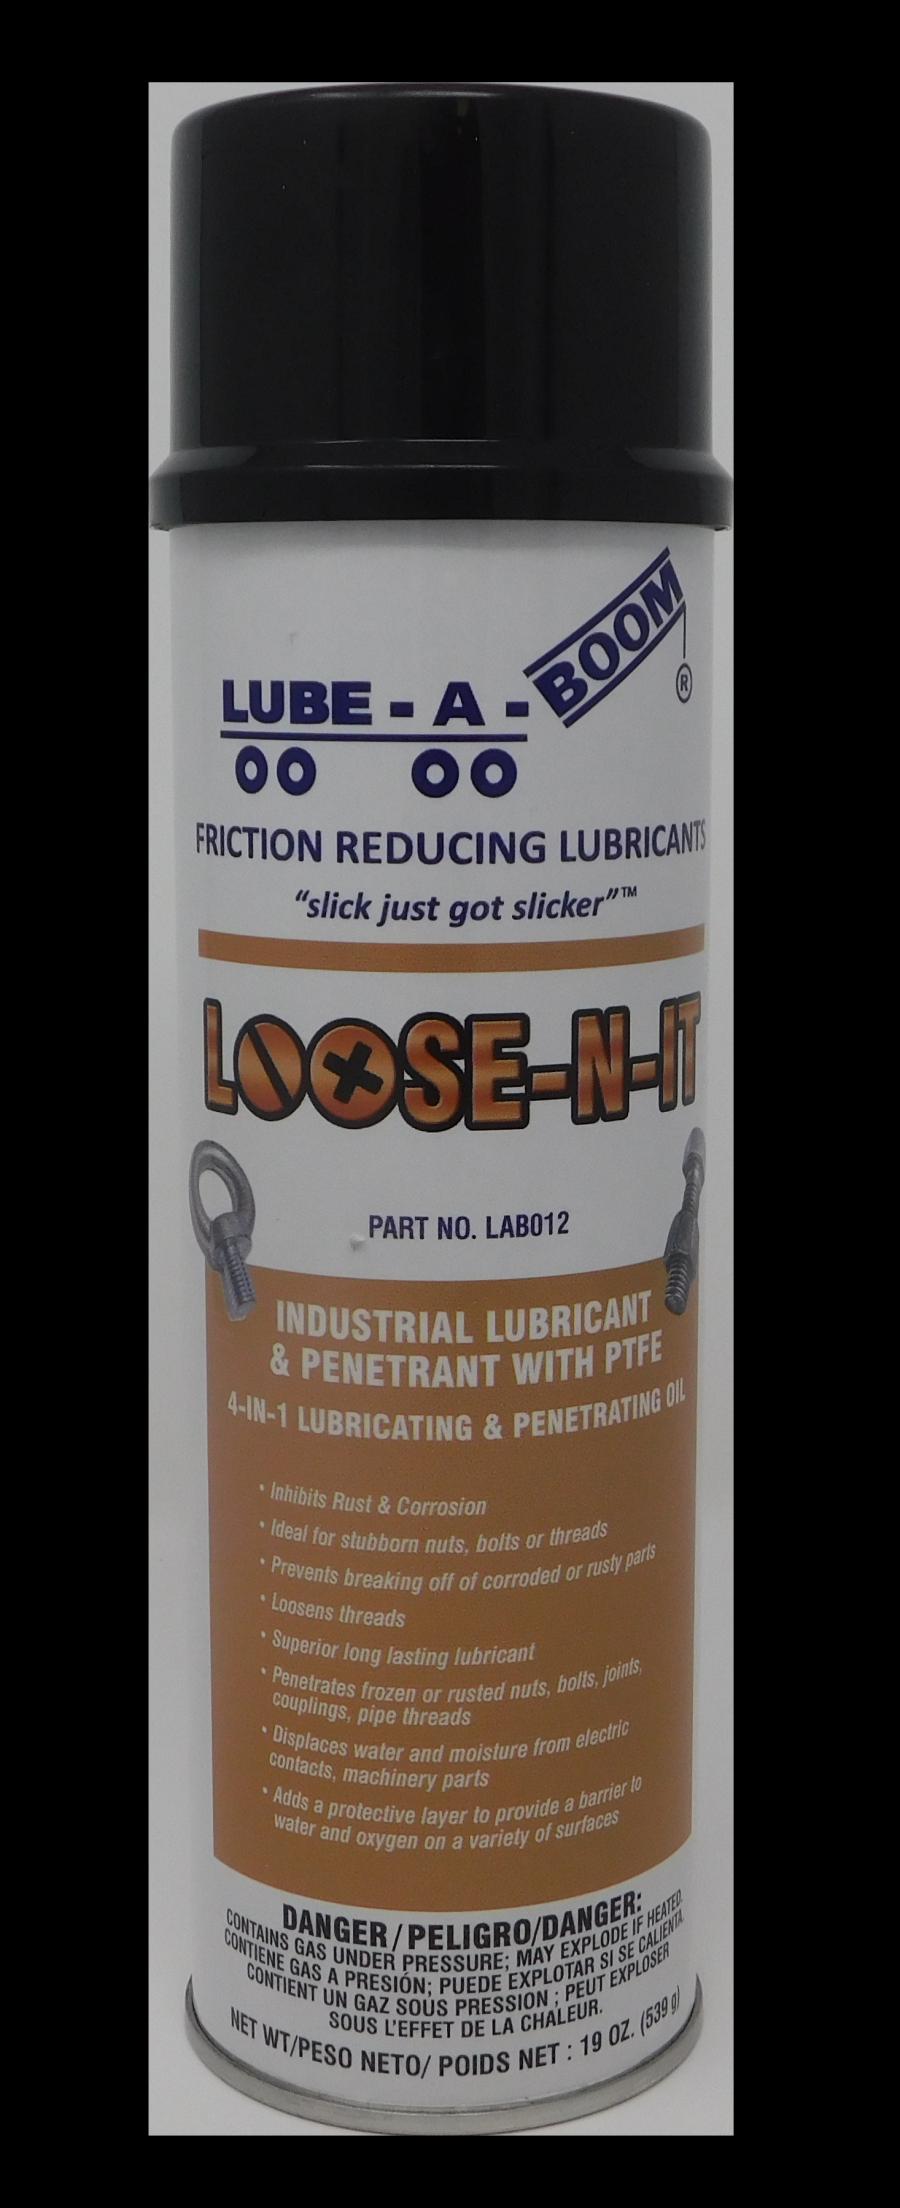 Loose-N-It’s specially blended formula provides users a 4-in-1 solution for service-related needs. Specifically, its penetrates old bolts and screws, lubricates, displaces moisture, and resists corrosion. It also inhibits rust and corrosion by adding a protective layer that creates a barrier to protect against water and oxygen infiltration, while at the same time, displaces water from electrical contact points and machinery parts.